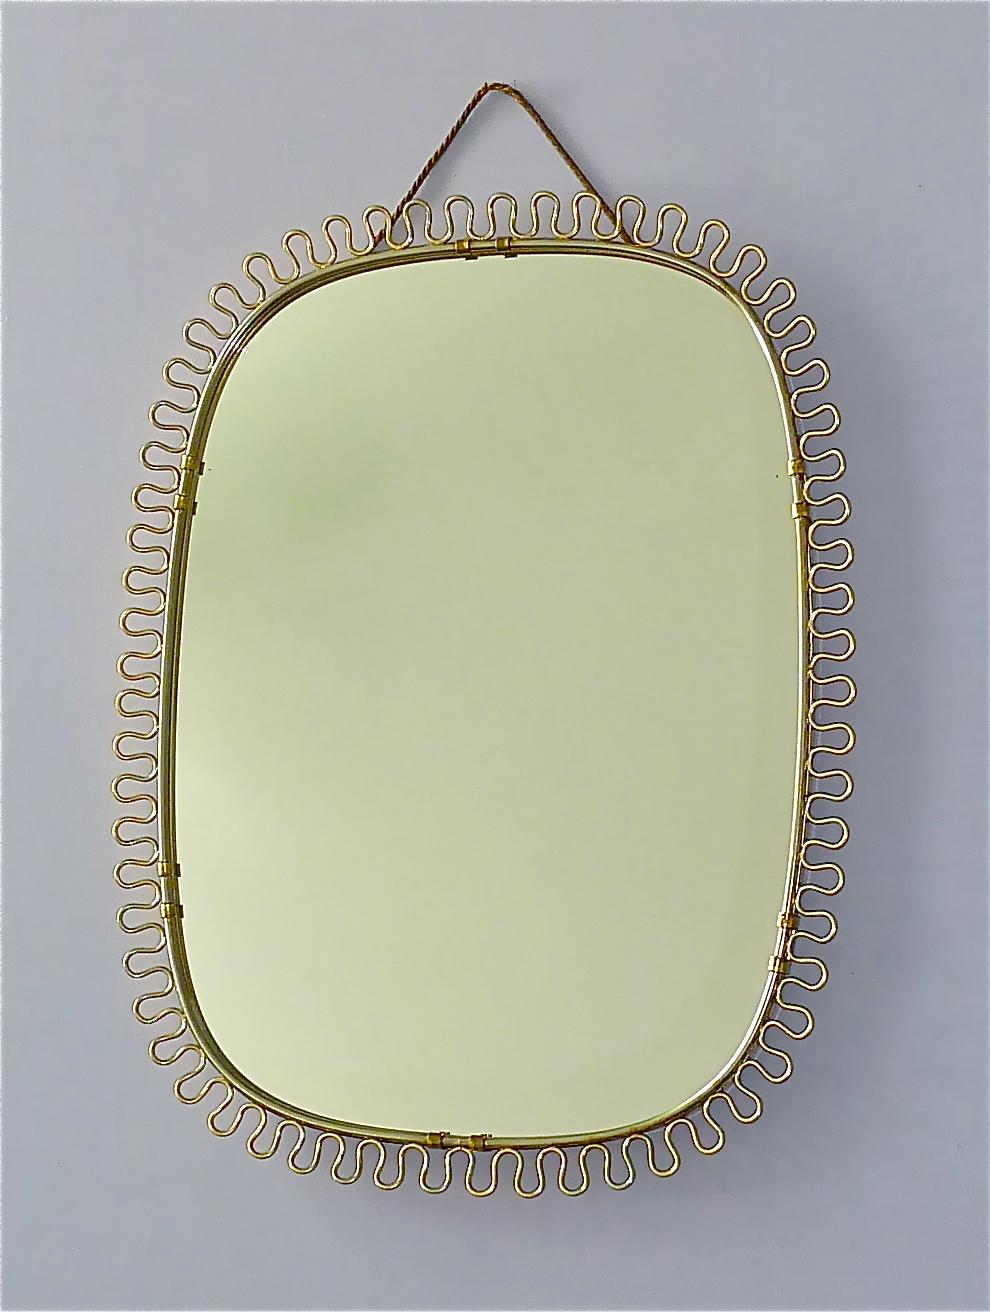 Sculptural and elegant midcentury wall mirror by Josef Frank Austria or Sweden for Svenskt Tenn, circa 1940s-1950s which is made of patinated brass metal, a beautiful brass loop-wire-decoration, original mirror glass, solid wood at the back and its